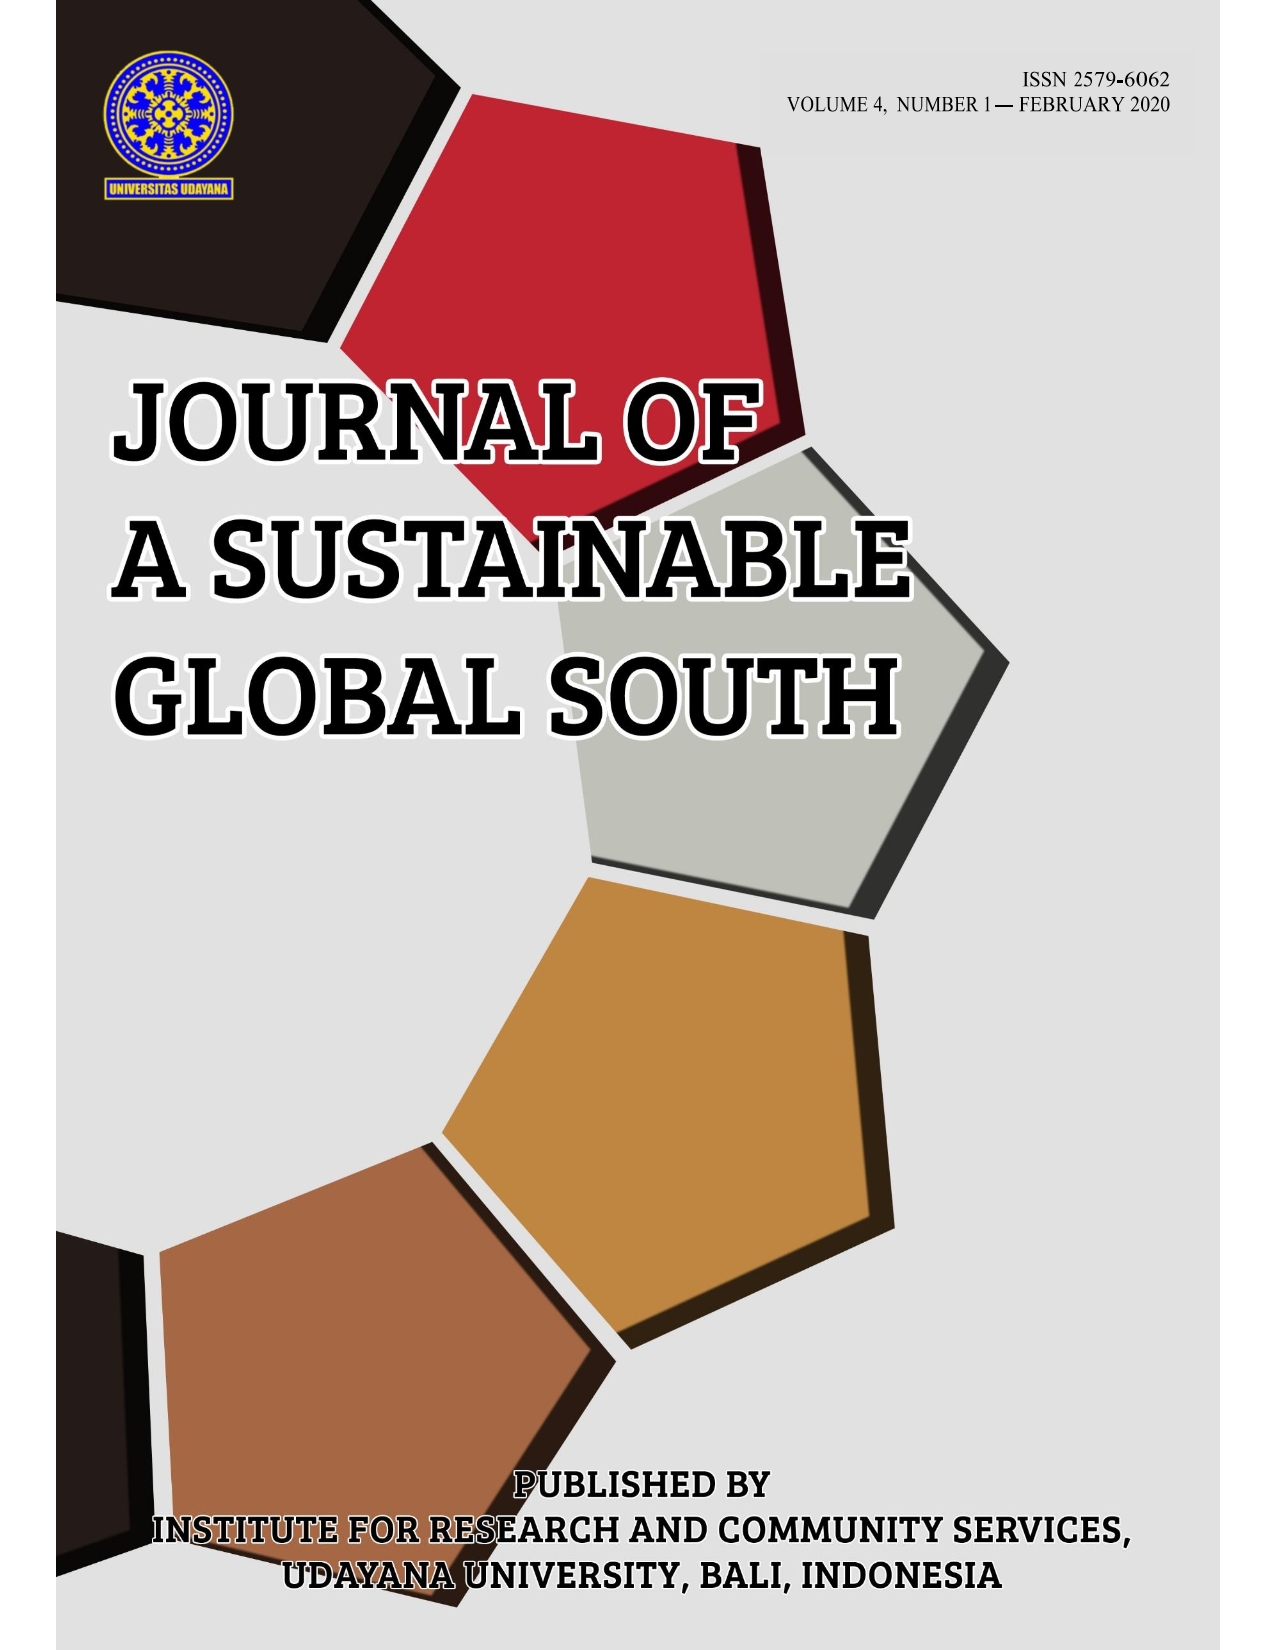 Journal of Sustainable Global South (JSGS) UNUD